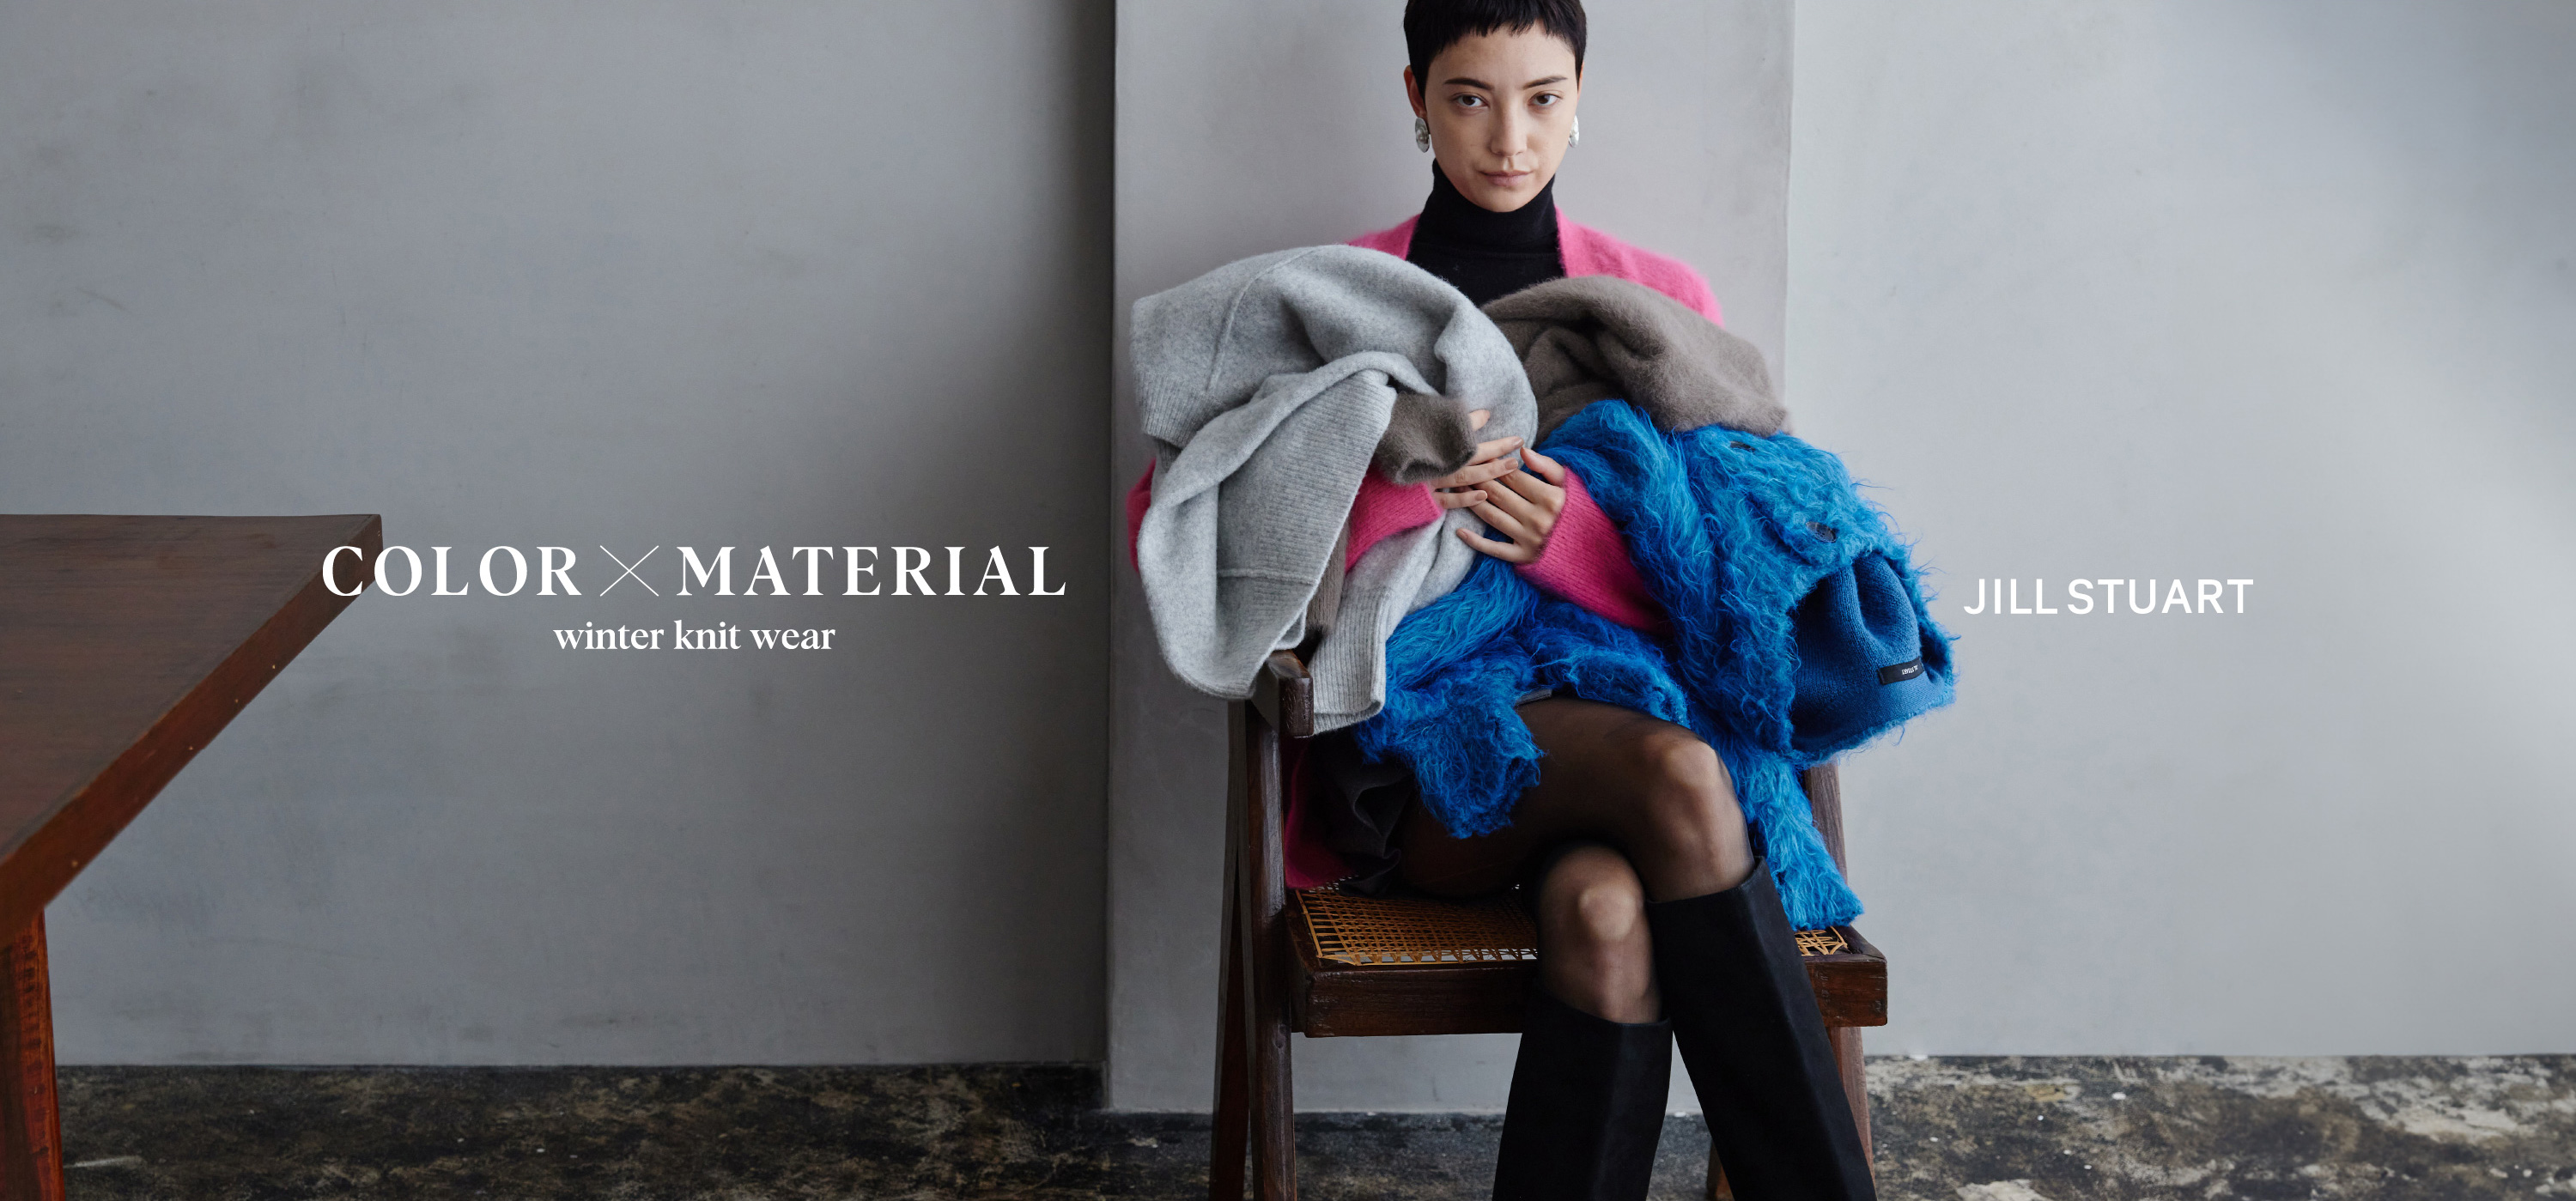 COLOR ✕ MATERIAL winter knit wear